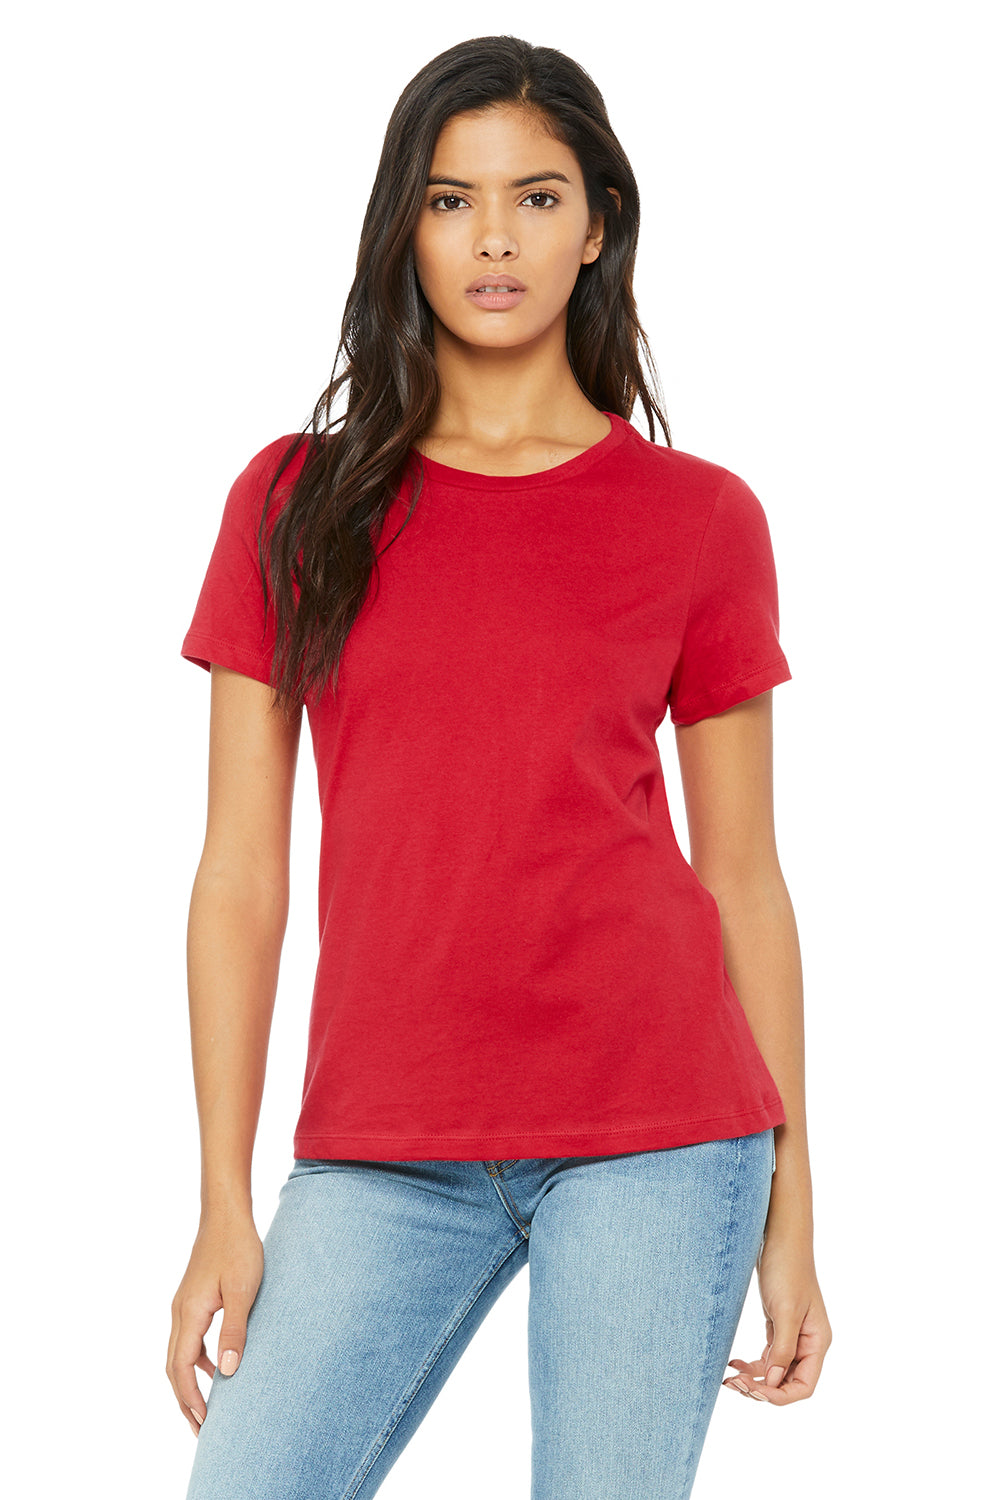 Bella + Canvas BC6400/B6400/6400 Womens Relaxed Jersey Short Sleeve Crewneck T-Shirt Red Model Front